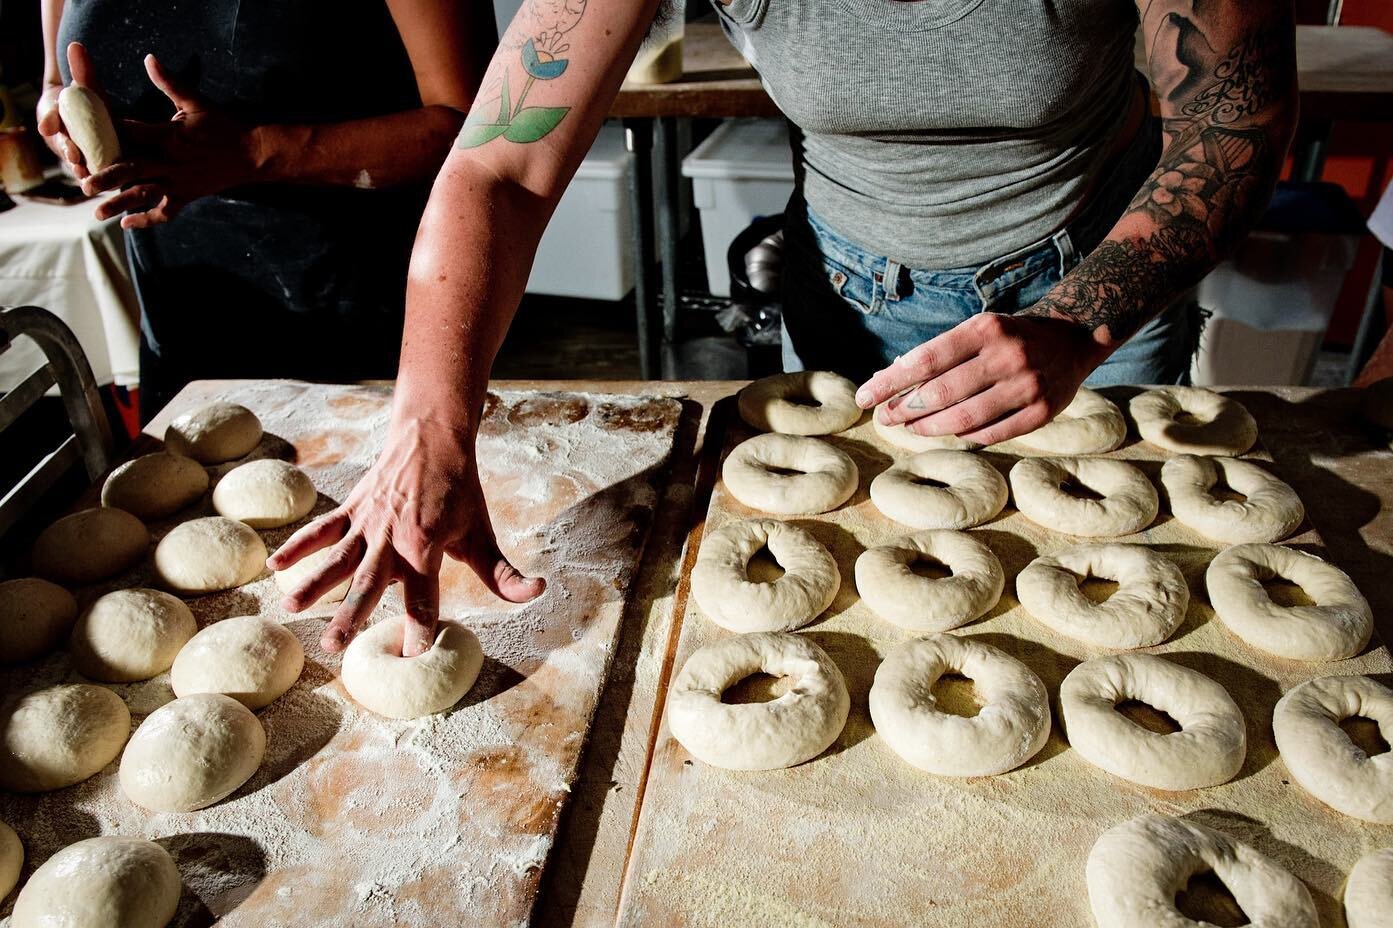 Another summer highlight- getting a peek behind the scenes of the @fantzyebagels early morn women-run bagel operation